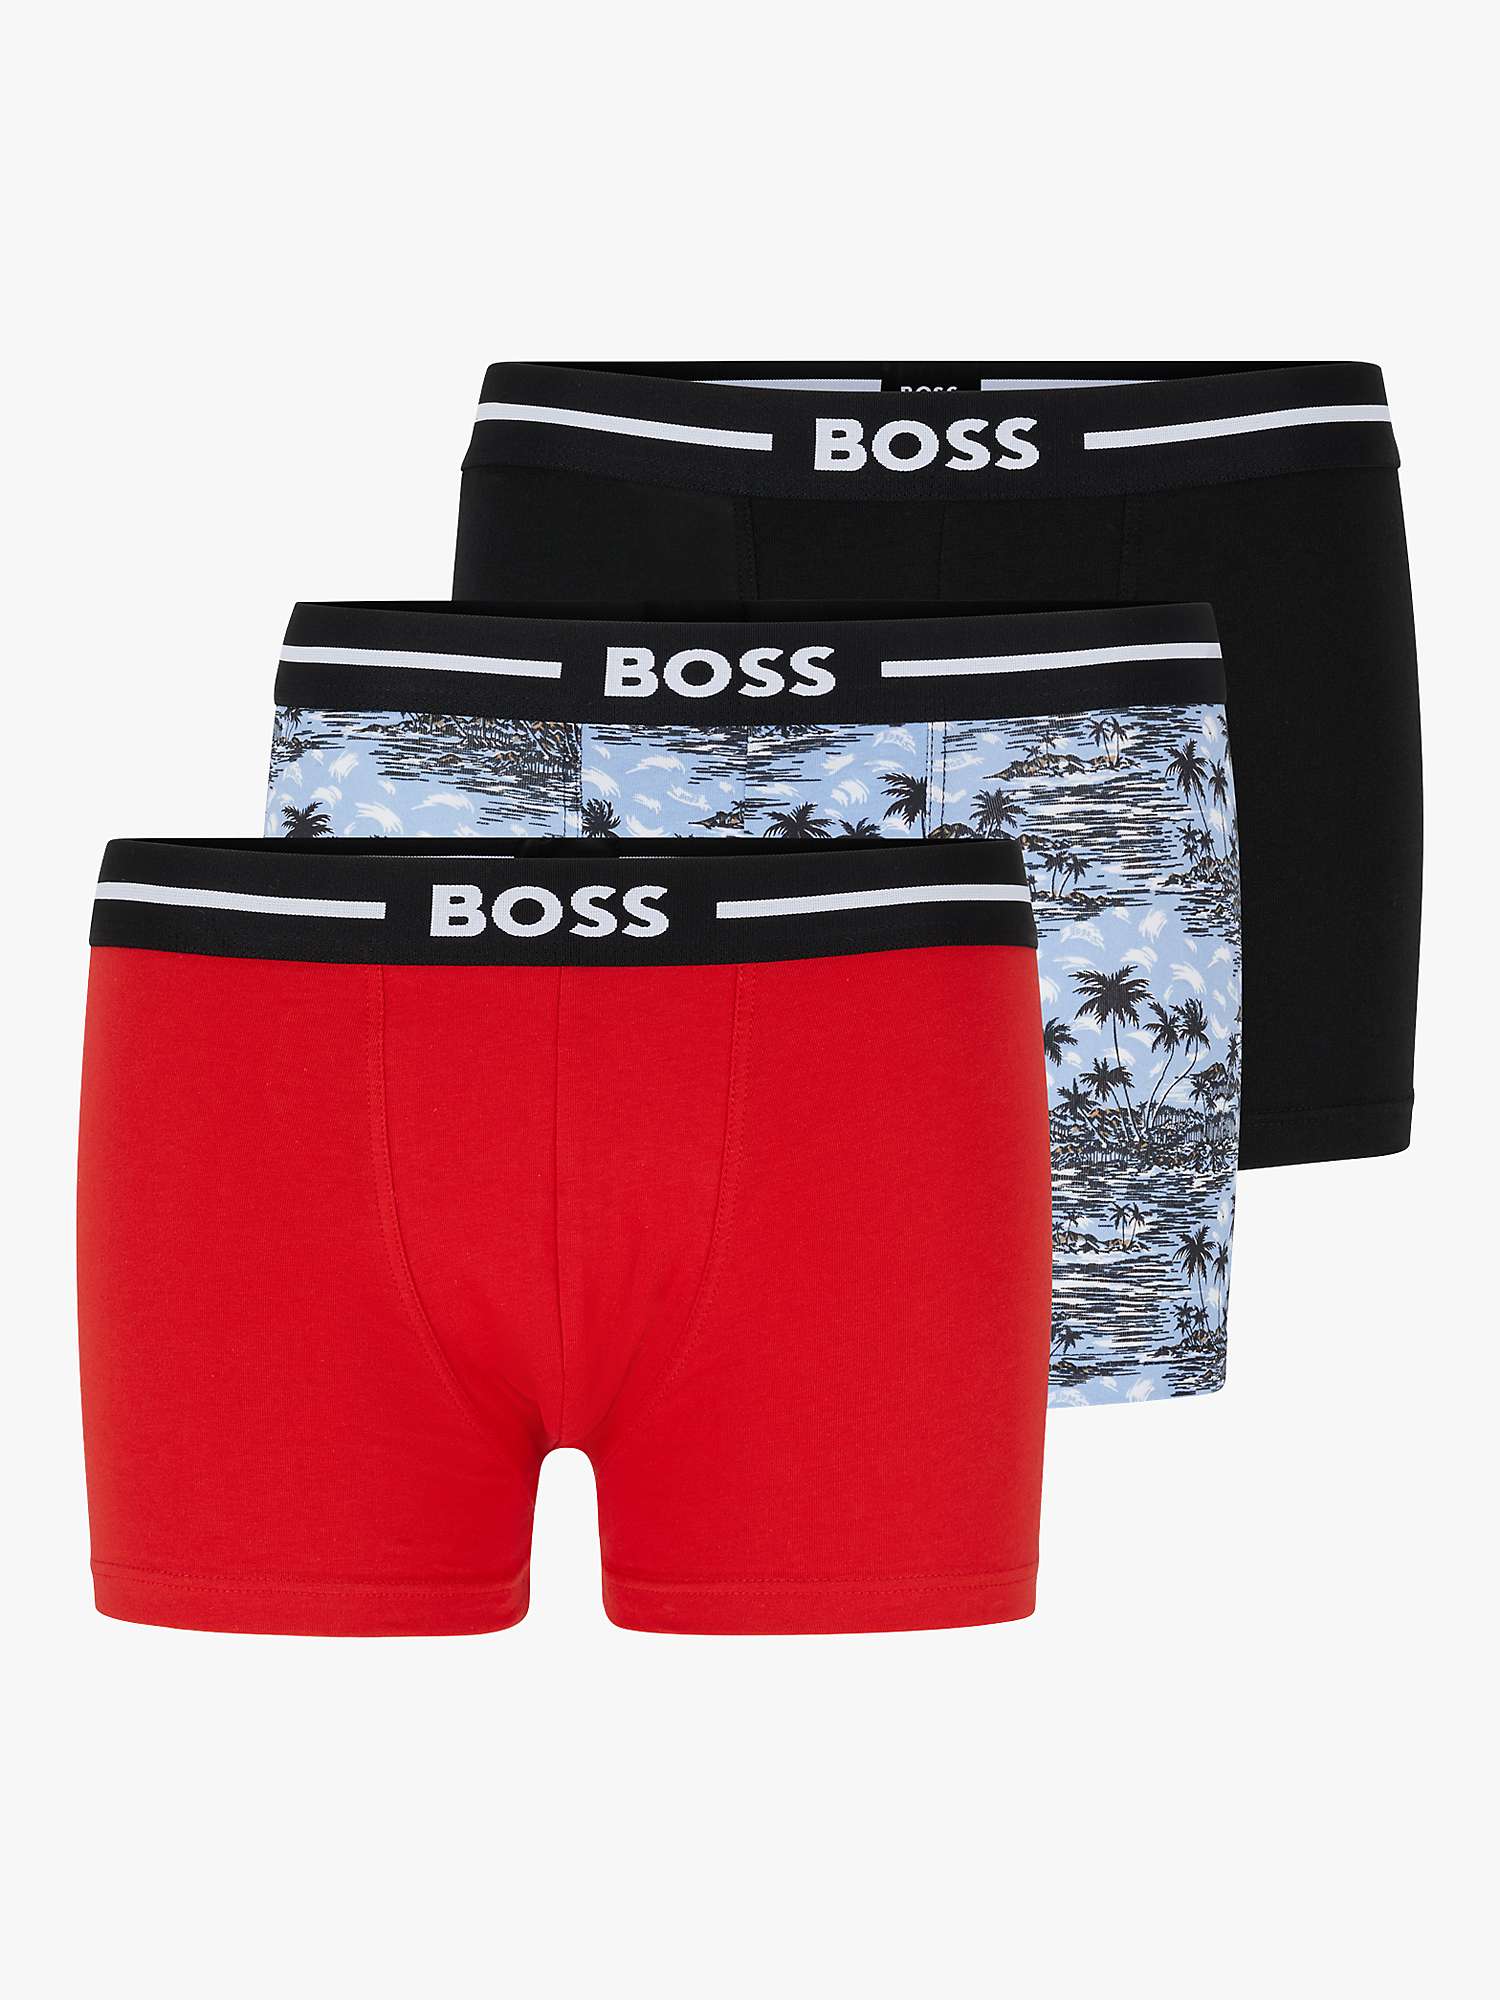 Buy BOSS Bold Design Stretch Cotton Trunks, Pack of 3, Red/Blue/Multi Online at johnlewis.com